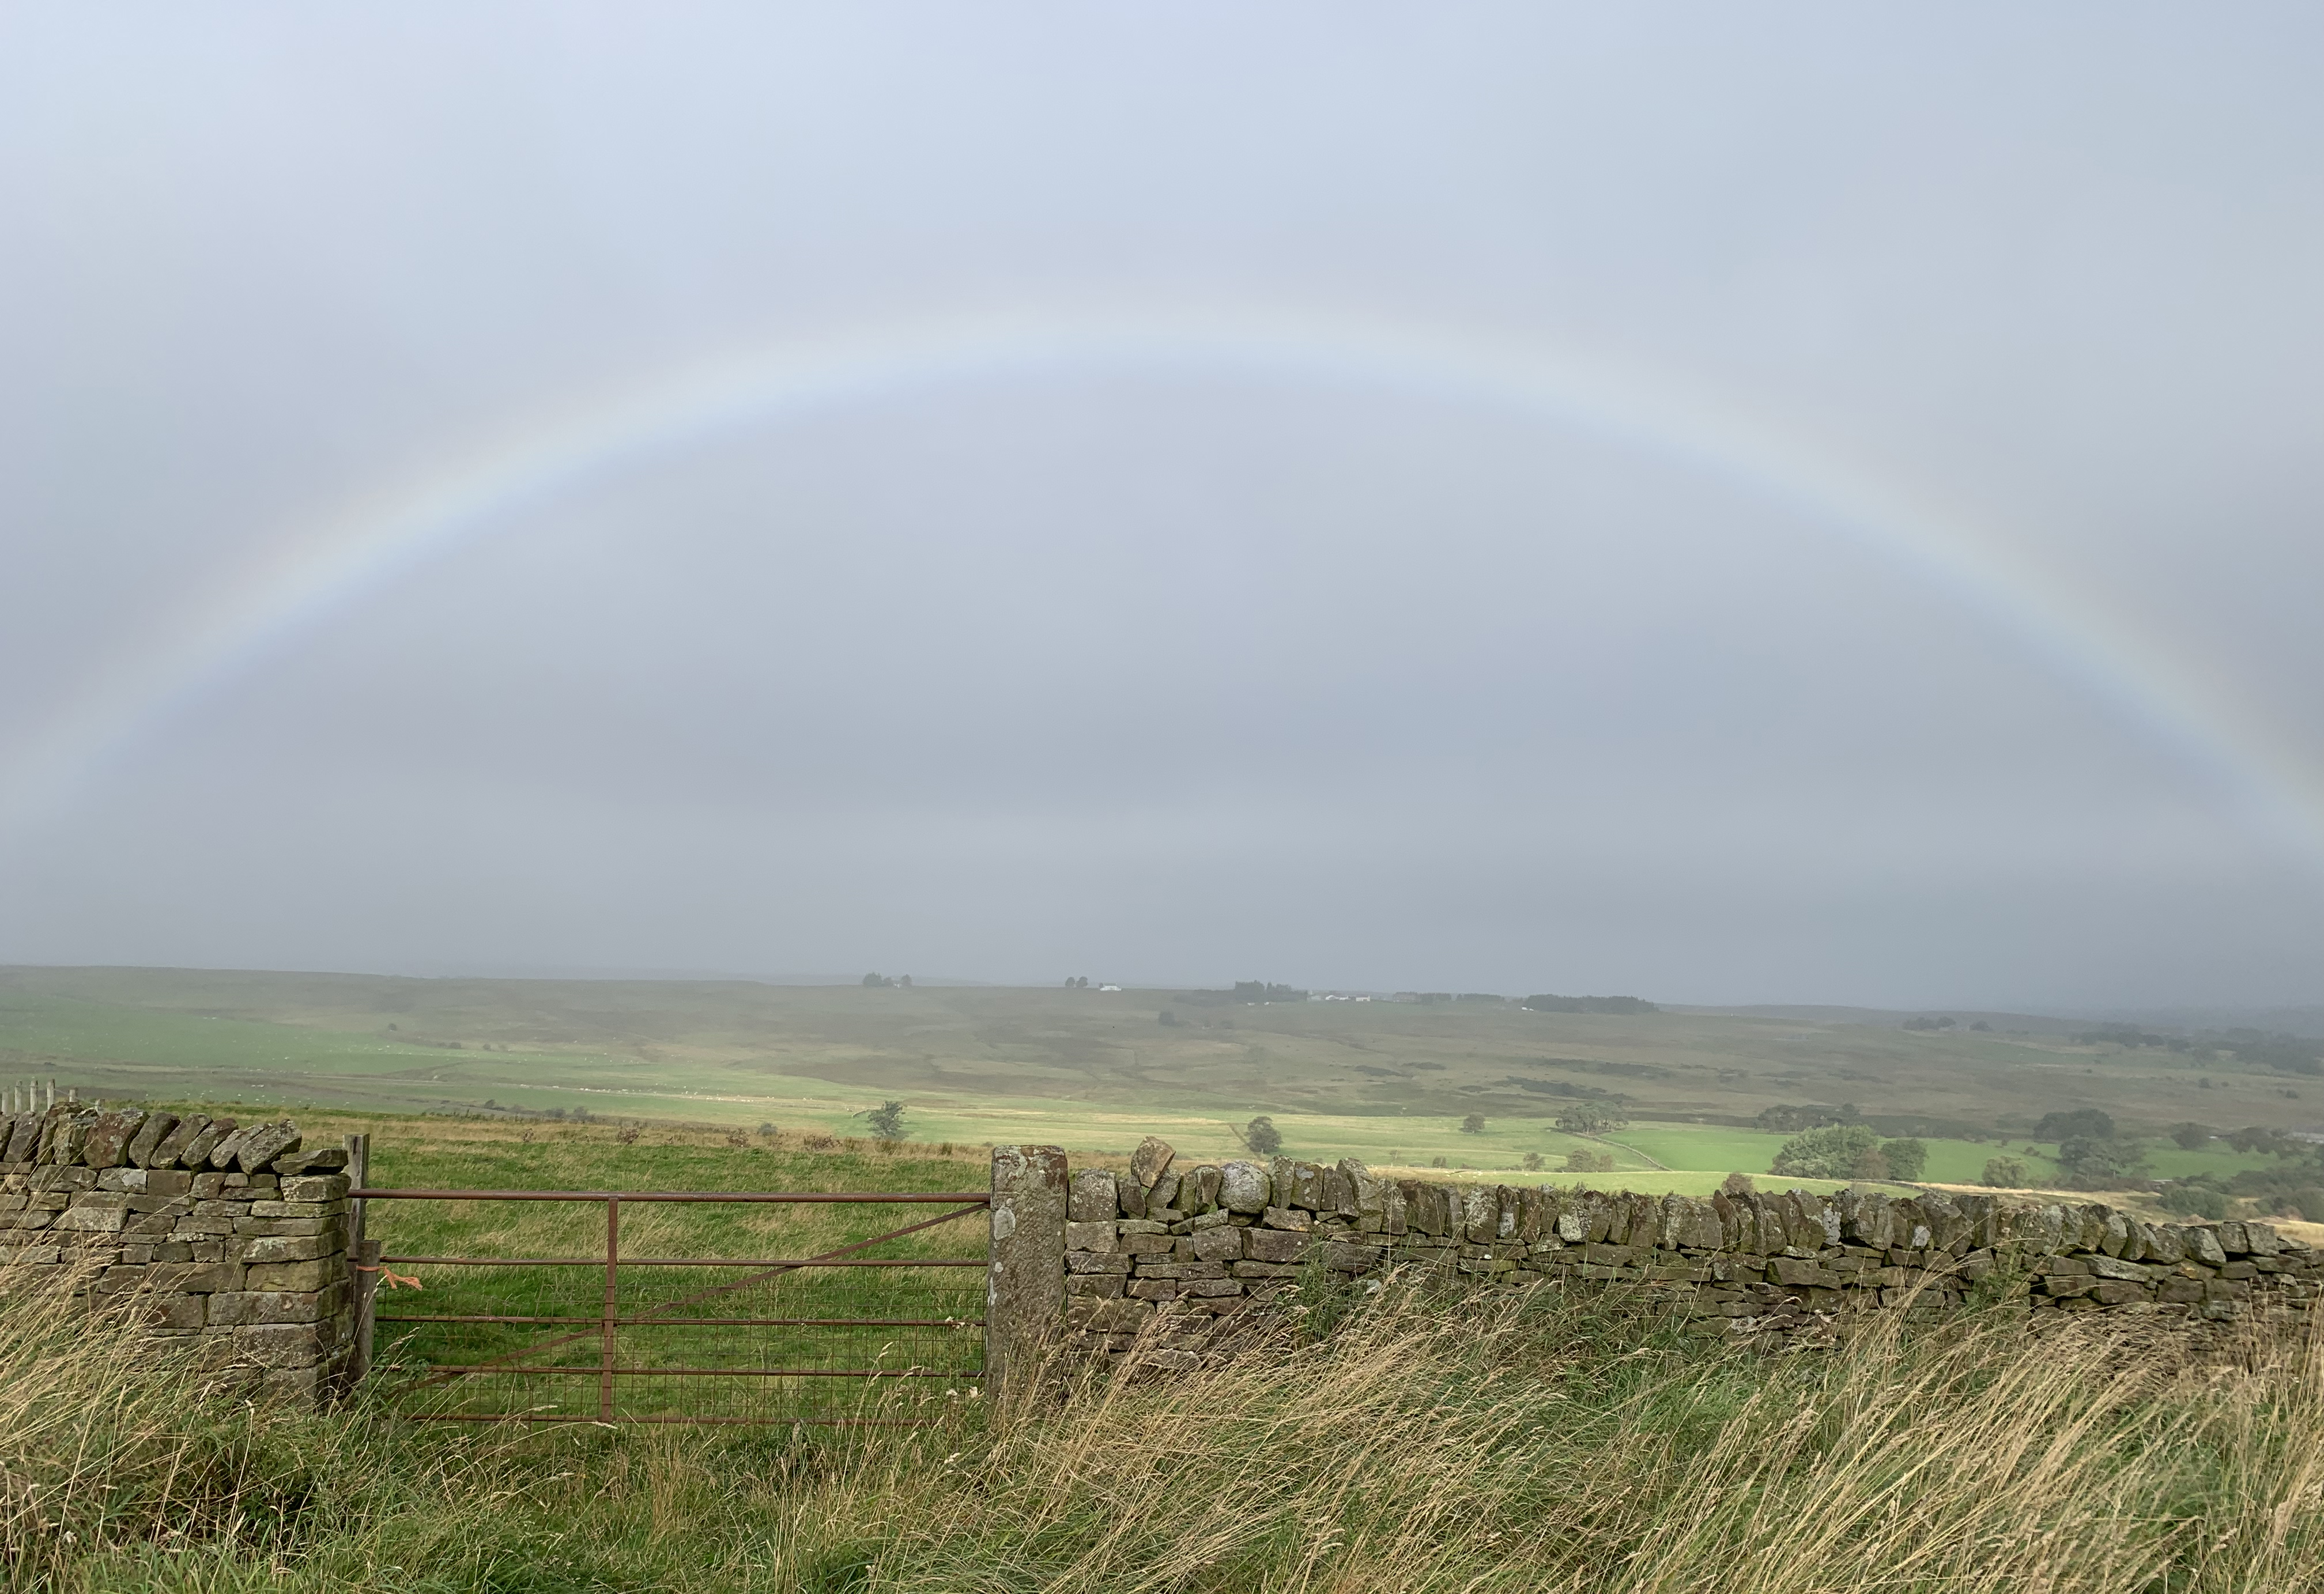 Peaceful countryside image showing fields a cloudy sky and a full rainbow.